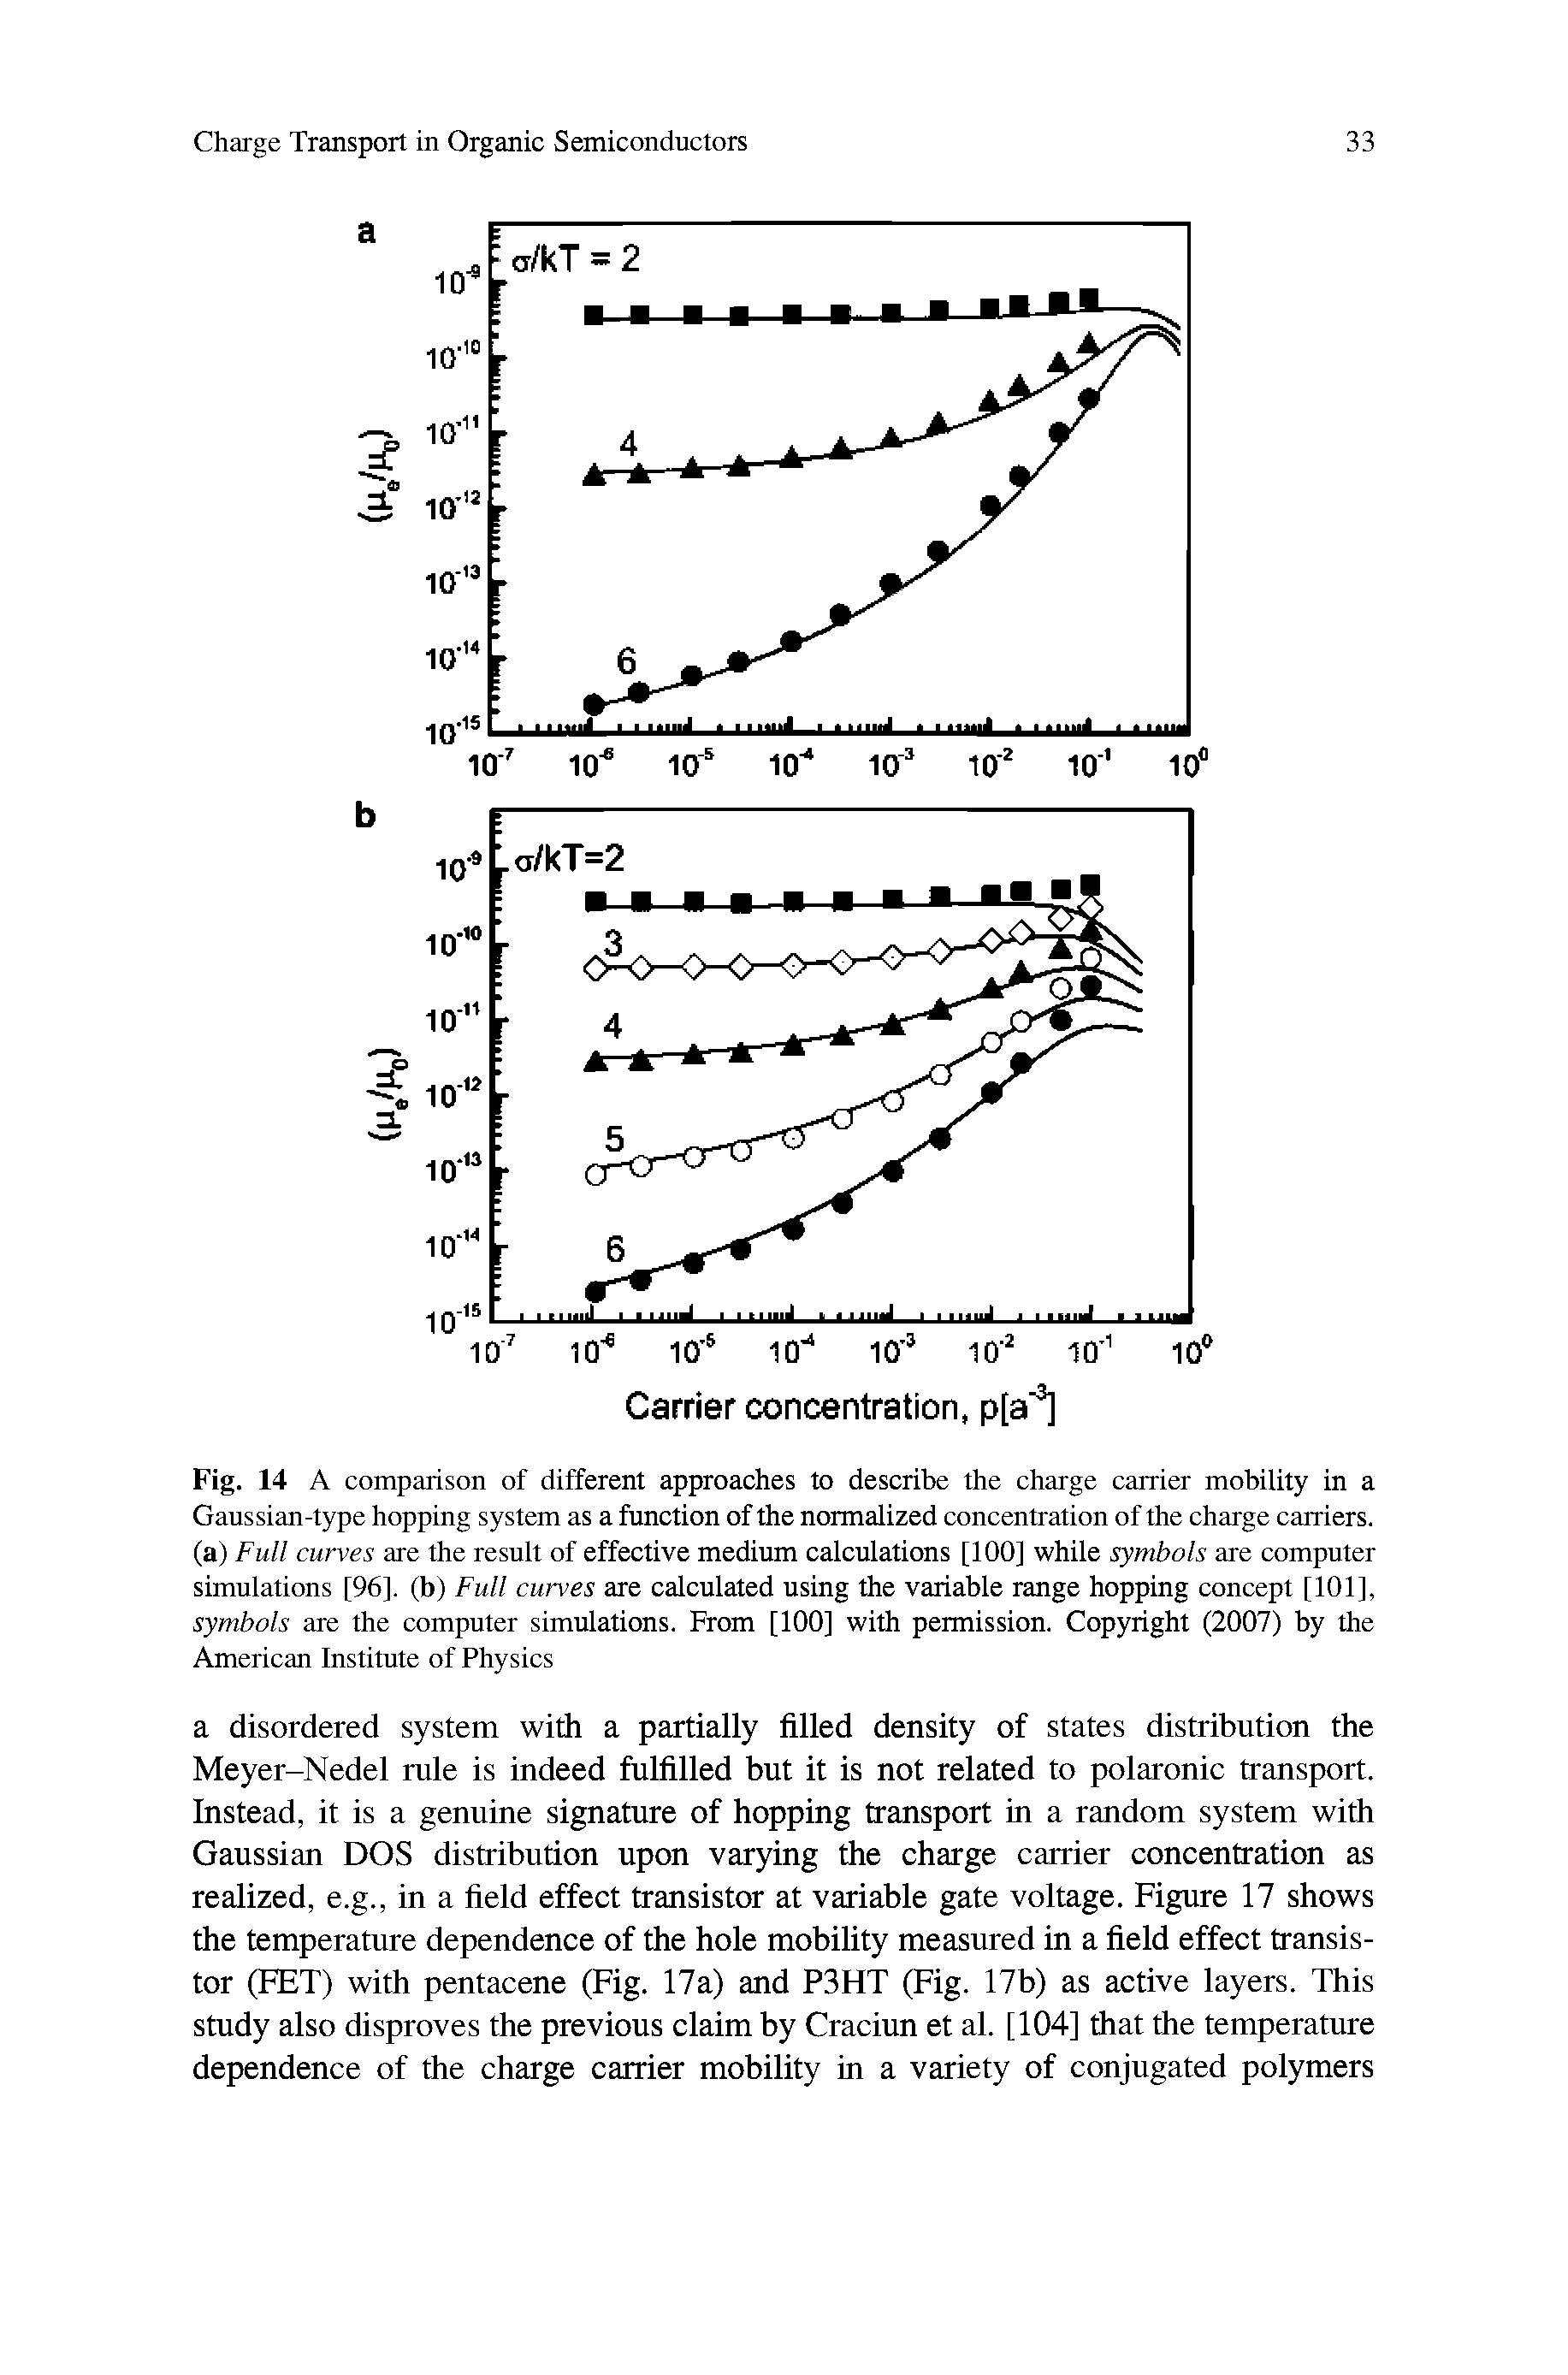 Fig. 14 A comparison of different approaches to describe the charge carrier mobility in a Gaussian-type hopping system as a function of the normalized concentration of the charge carriers, (a) Full curves are the result of effective medium calculations [100] while symbols are computer simulations [96], (b) Full curves are calculated using the variable range hopping concept [101], symbols are the computer simulations. From [100] with permission. Copyright (2007) by the American Institute of Physics...